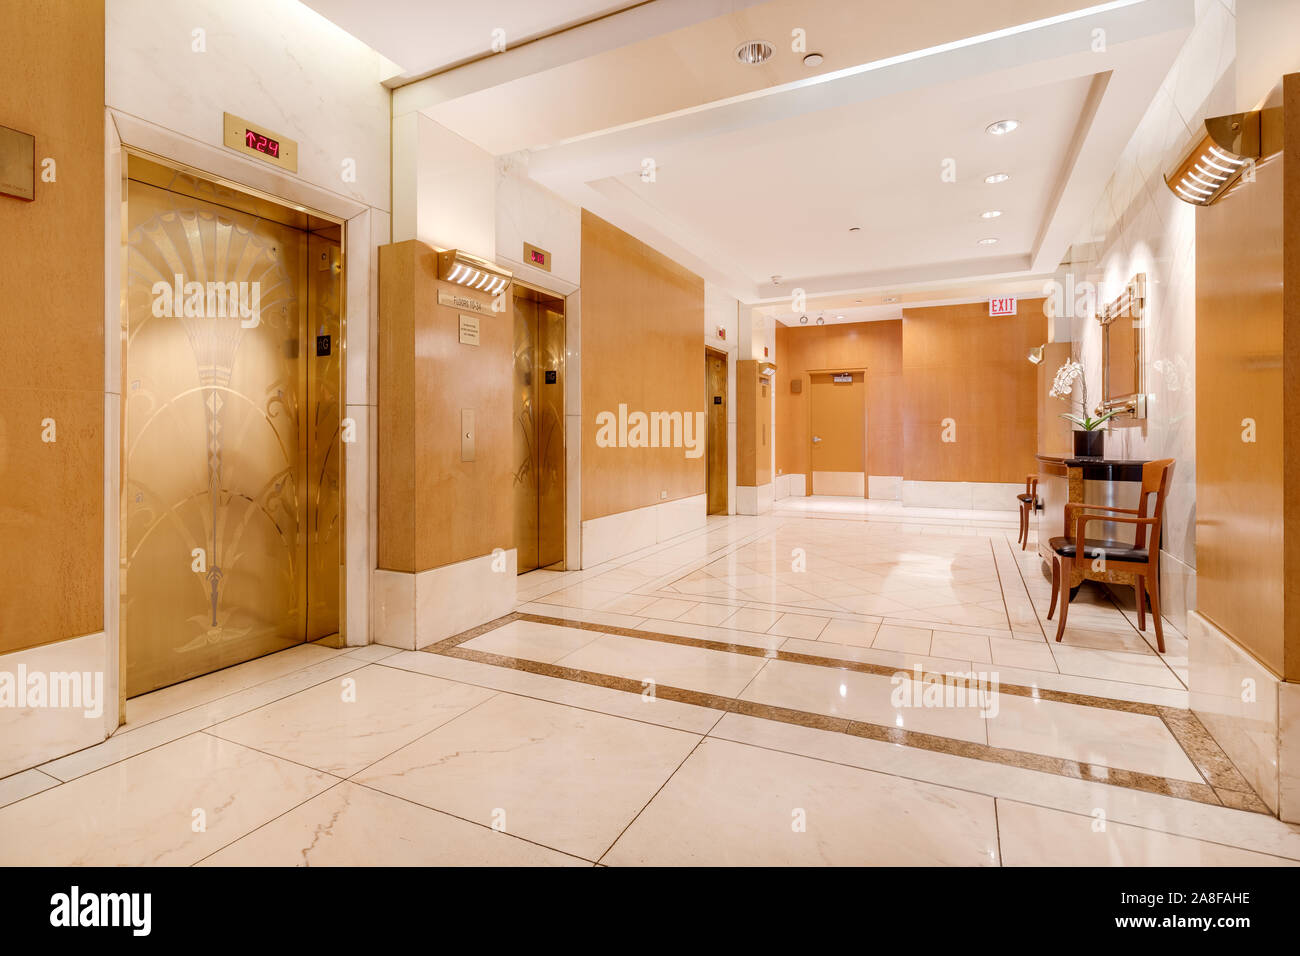 A elevator lobby at an expensive Chicago high rise with gold elevator doors and tiles covering the hallway floor. Stock Photo